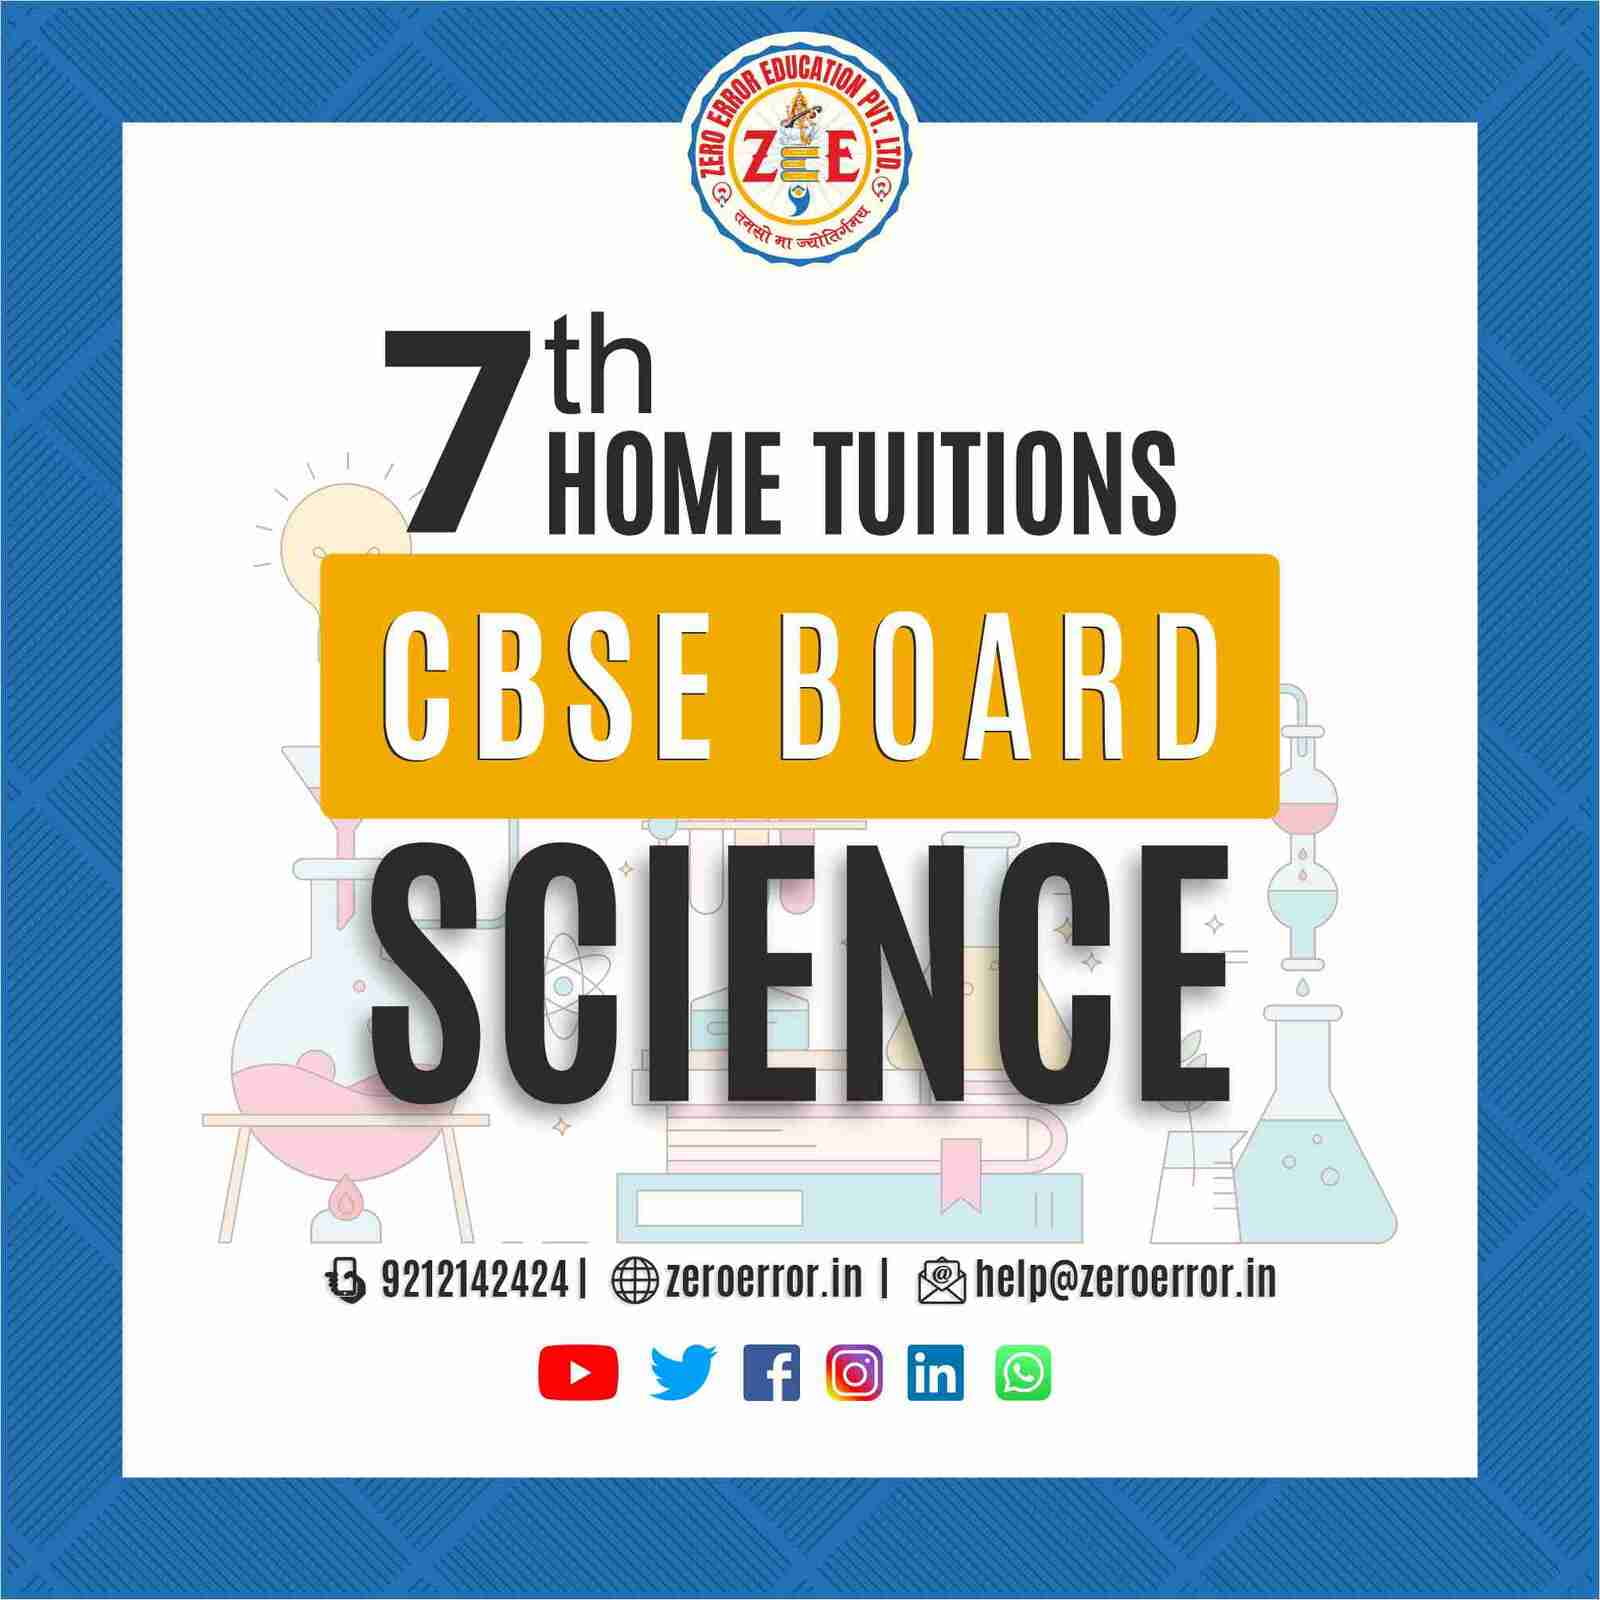 7th Grade CBSE Science Online Classes by Zero Error Education Prepare for your CBSE board exams with online and offline Science classes for 7th grade. Learn from experienced home tutors and get all the help you need to succeed. Enroll today at Zero Error Education. [https://zeroerror.in/] Call 9212142424 for more information.